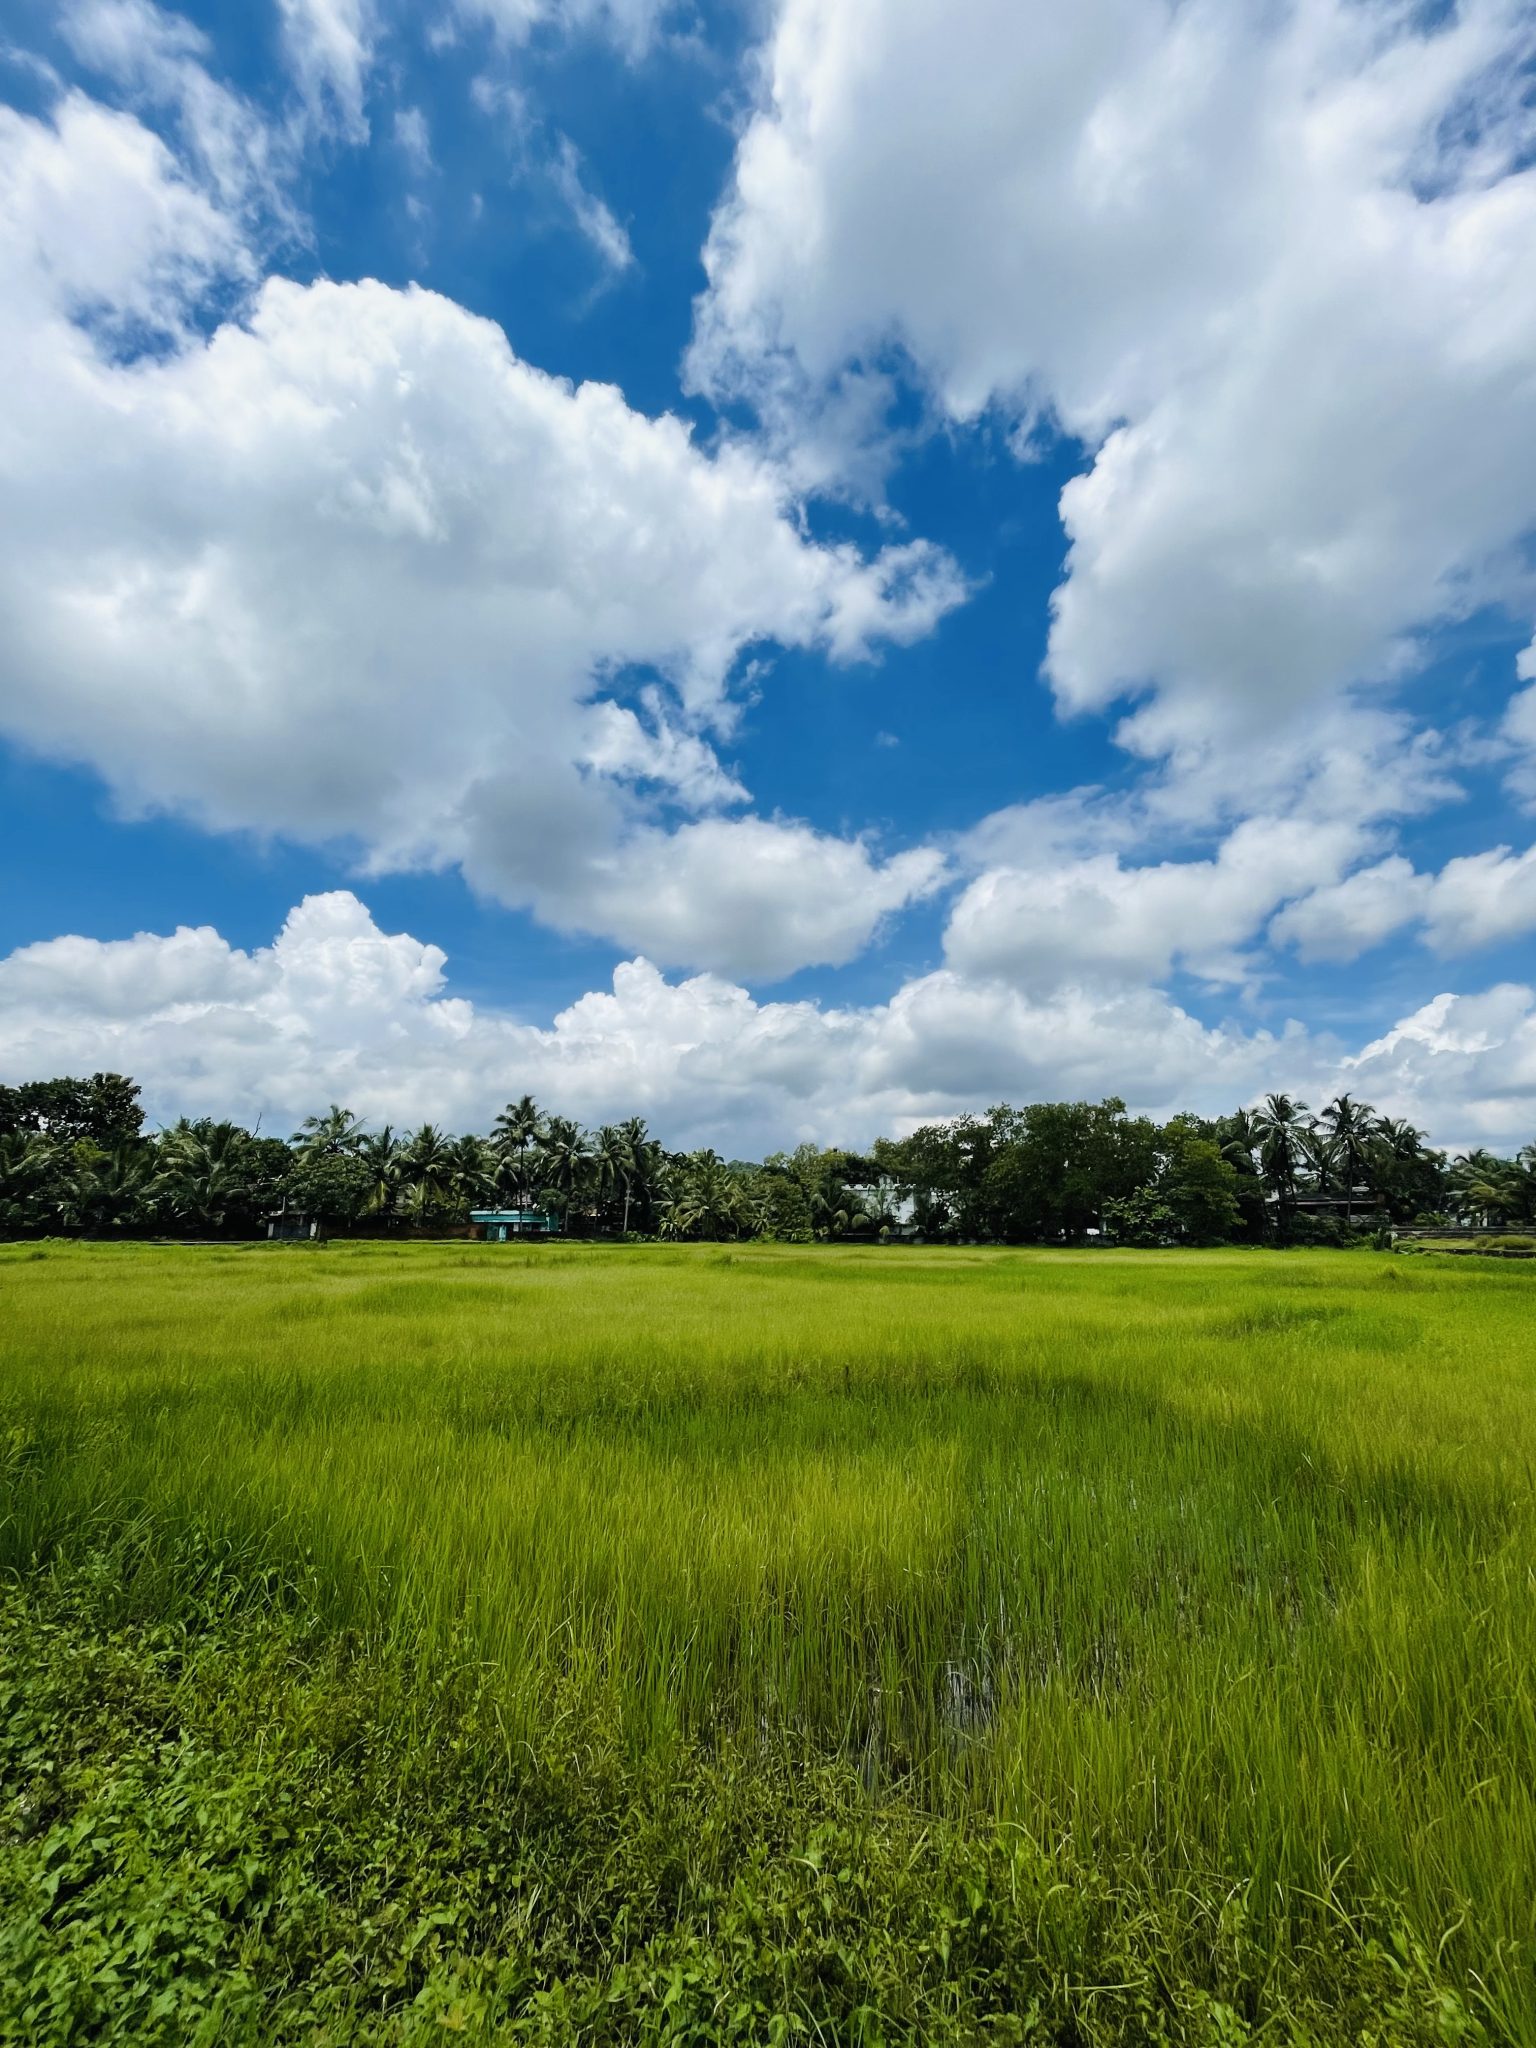 White clouds & paddy field. From Kozhikode, Kerala, India.